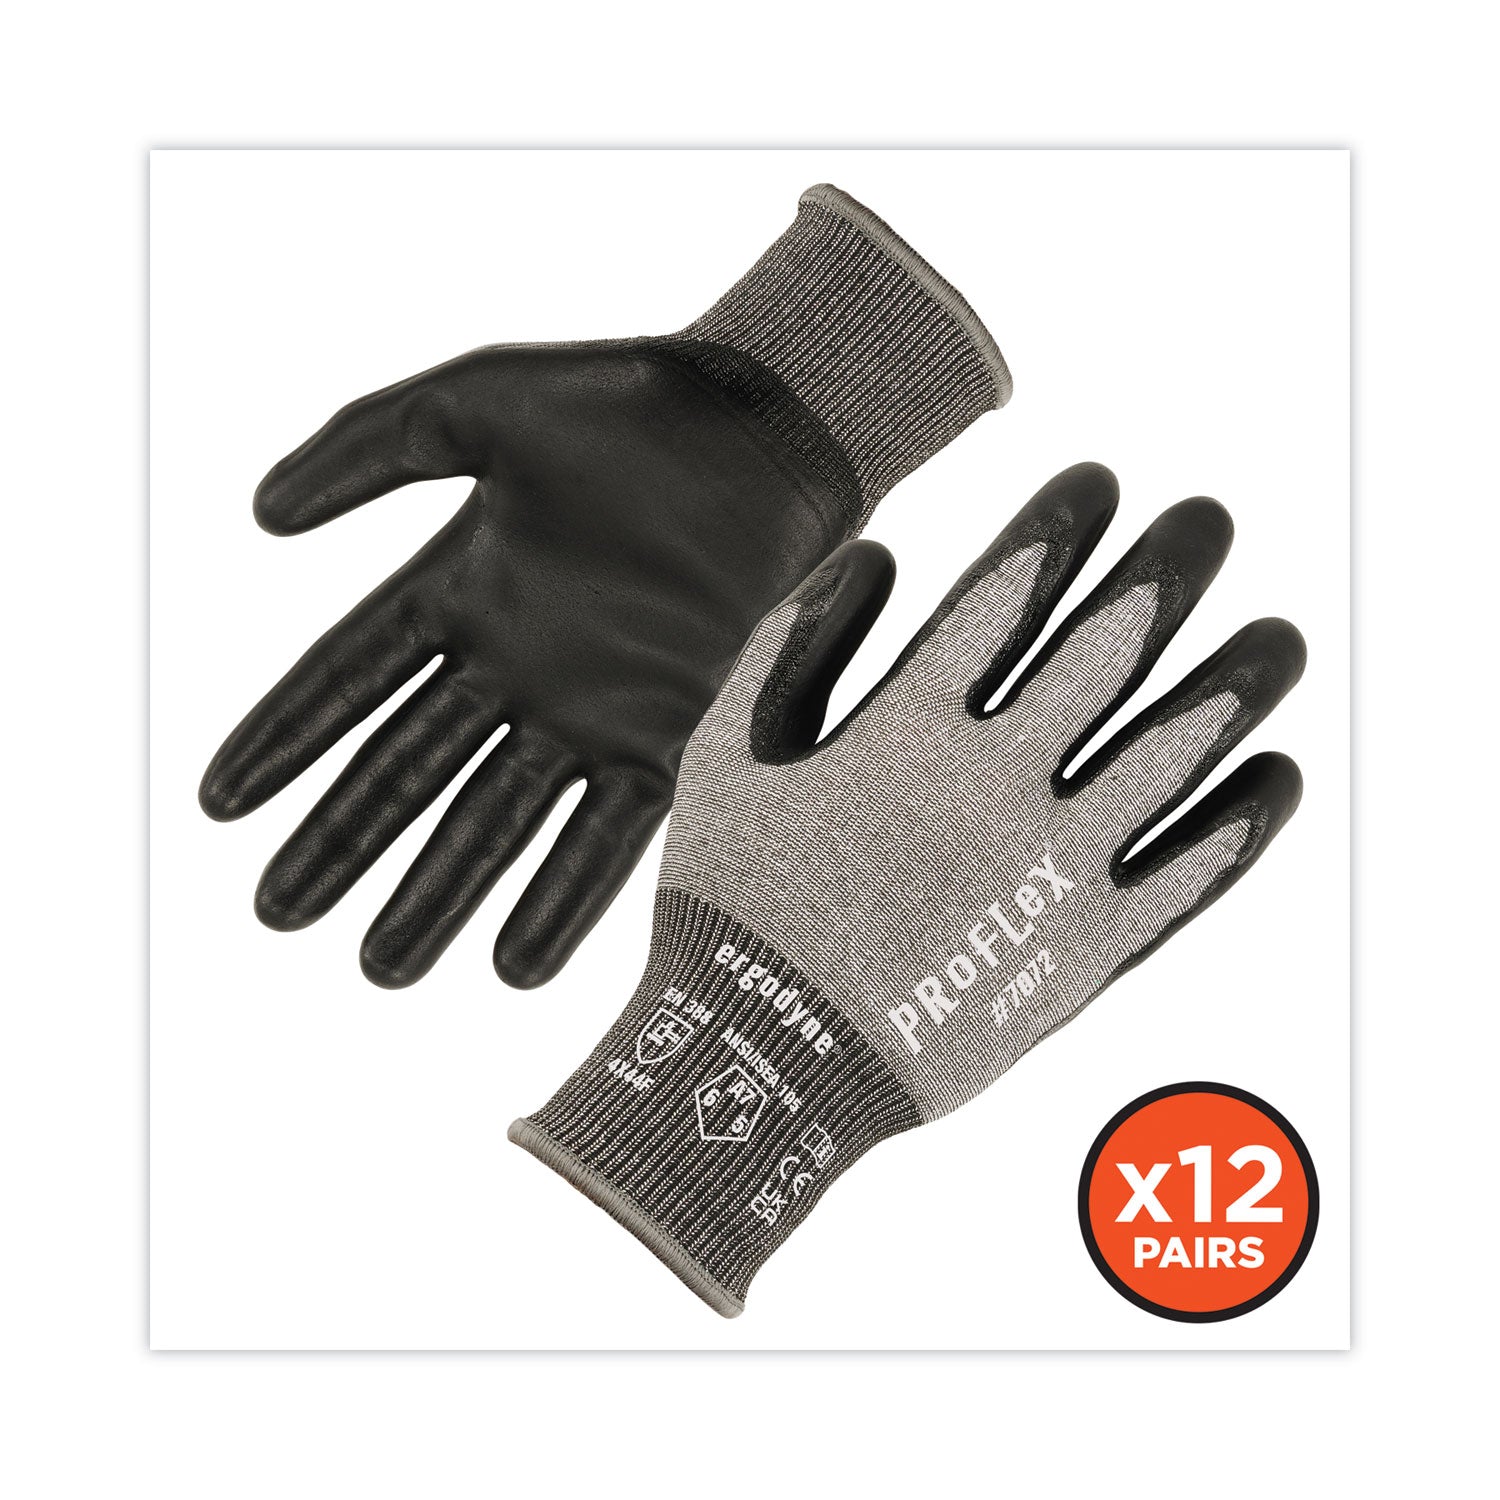 proflex-7072-ansi-a7-nitrile-coated-cr-gloves-gray-small-12-pairs-pack-ships-in-1-3-business-days_ego10302 - 6